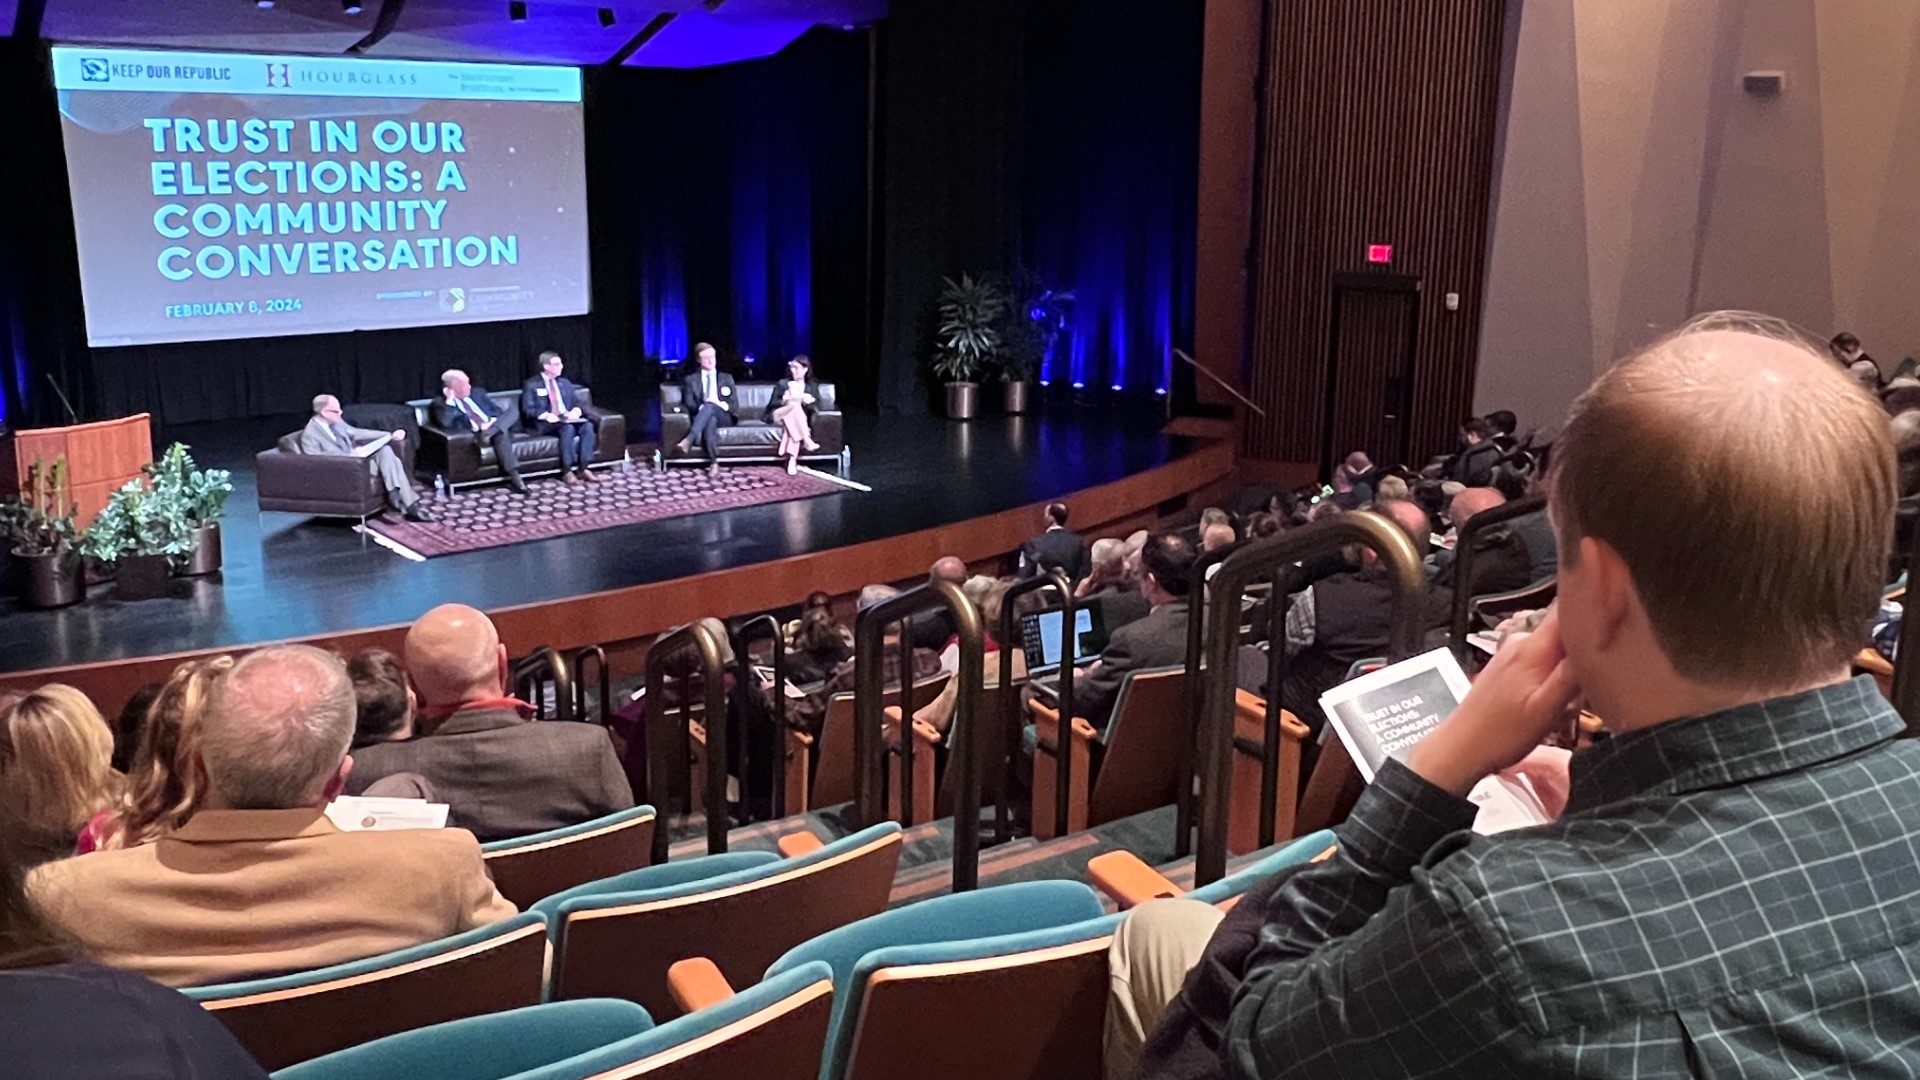 State and local experts took part in the "Trust in Our Elections: A Community Conversation" forum to provide transparency ahead of this year's elections.